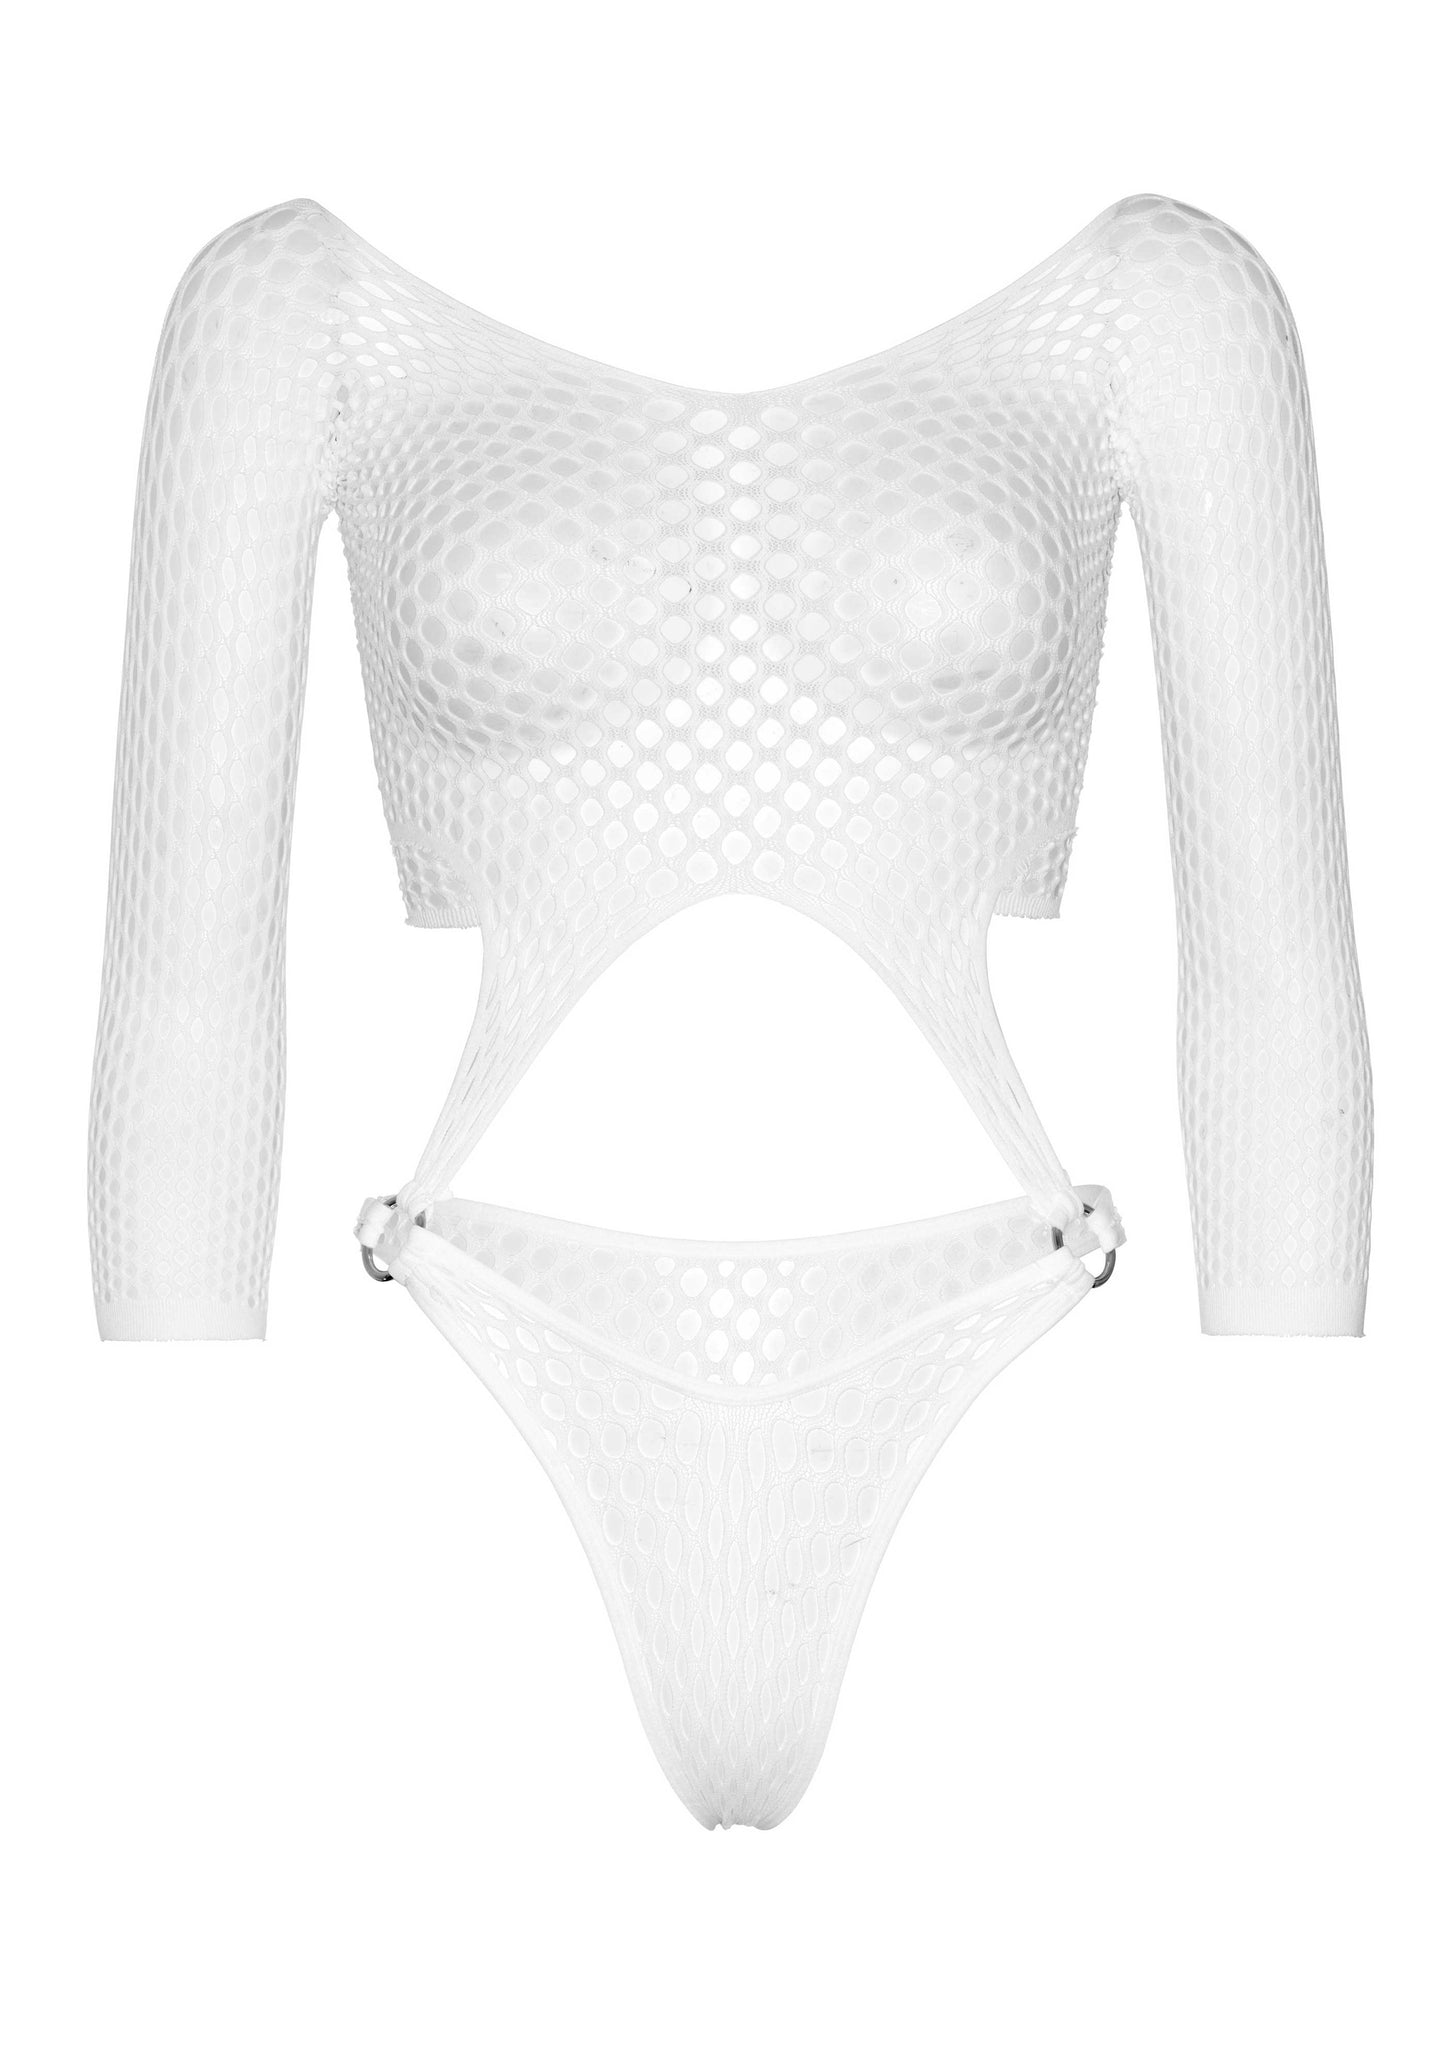 Leg Avenue 89289 Fishnet Bodysuit - White long sleeved pothole fishnet crop top with thong panty attached with silver O-rings.